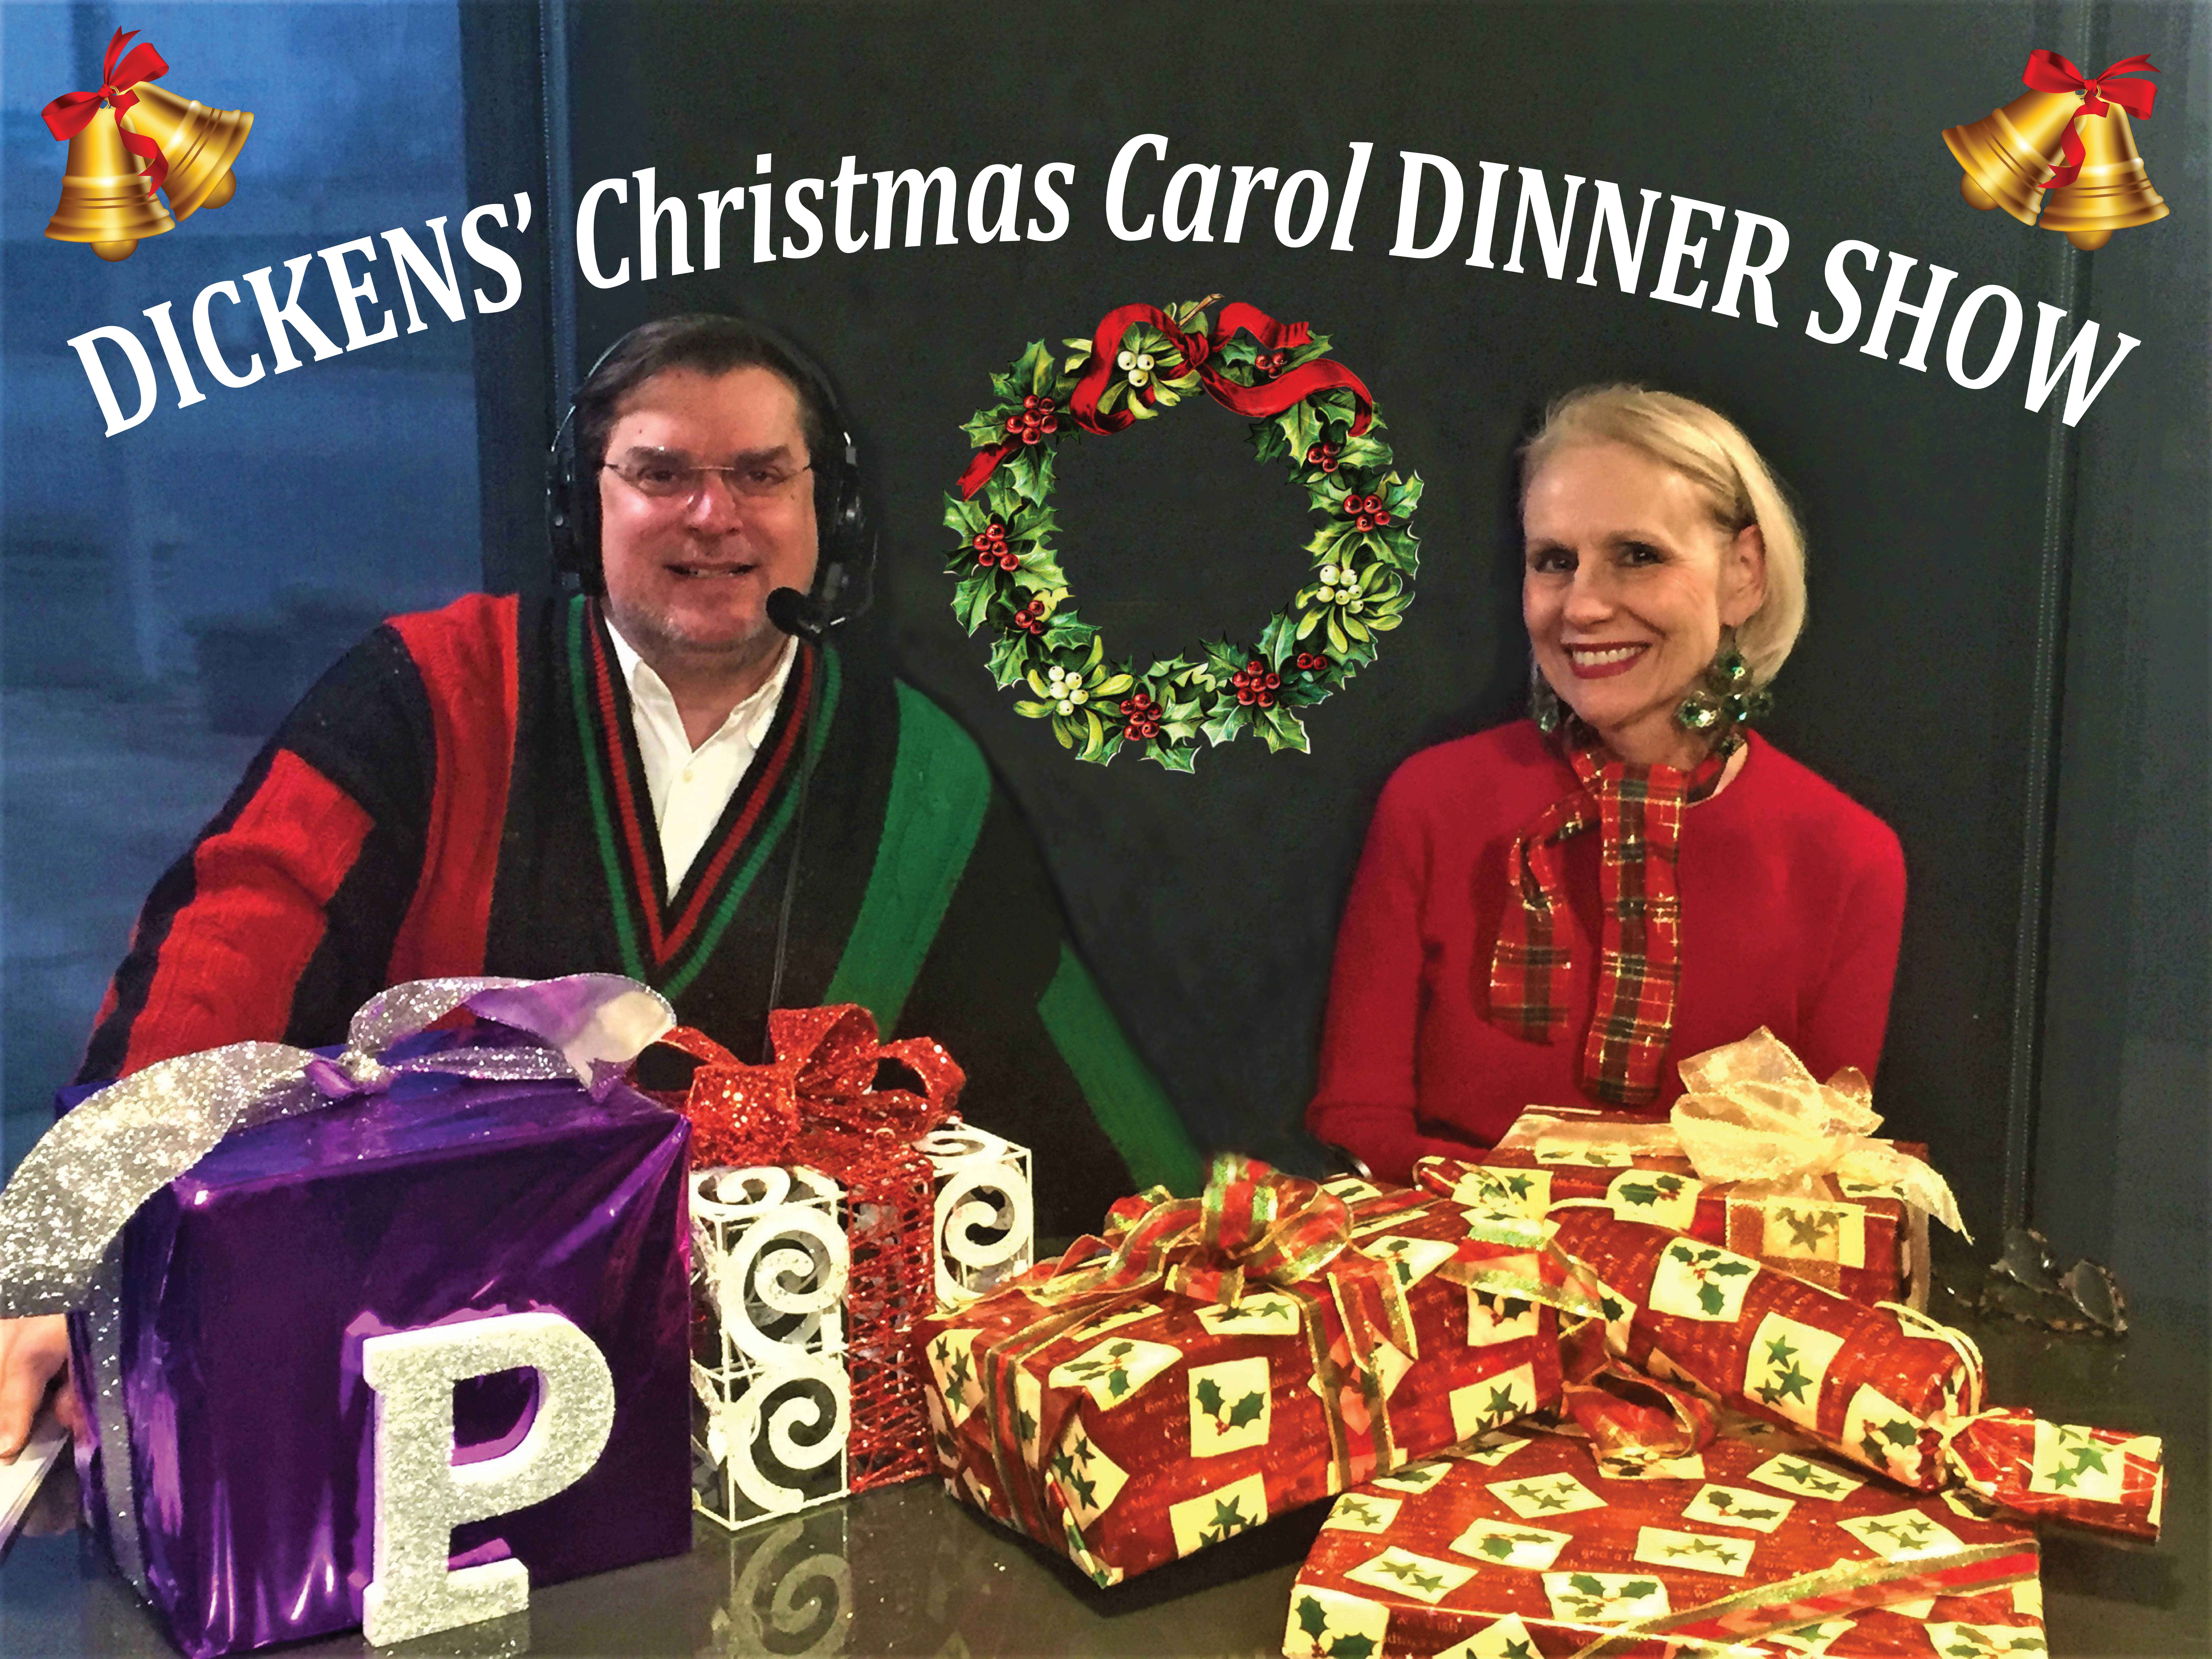 Author Philip Potempa will pair with his editor Crista Zivanovic to perform a 55-minute stage telling of Charles Dickens’ “A Christmas Carol” for two dinner shows Dec. 18 in the ballroom at The Center for Performing Arts in Munster. (Photo courtesy of the CVPA)